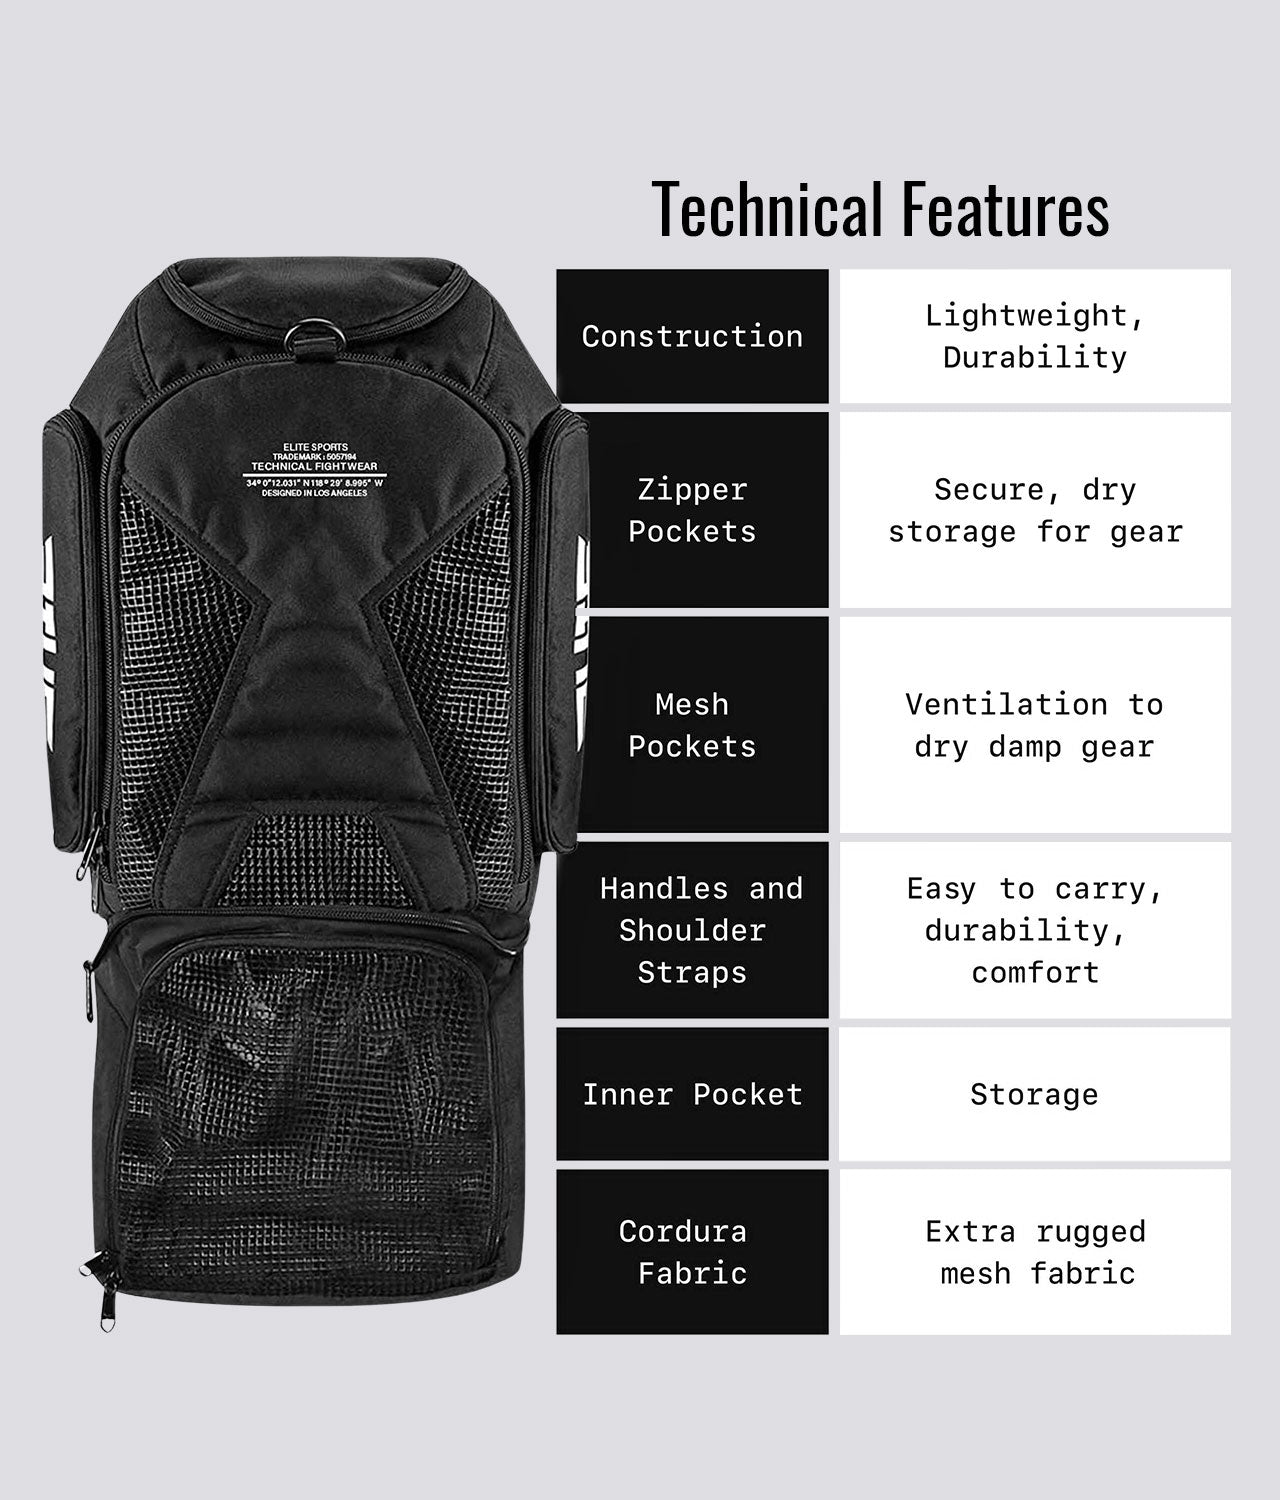 Elite Sports Convertible Black Gym Bag & Backpack Technical Features